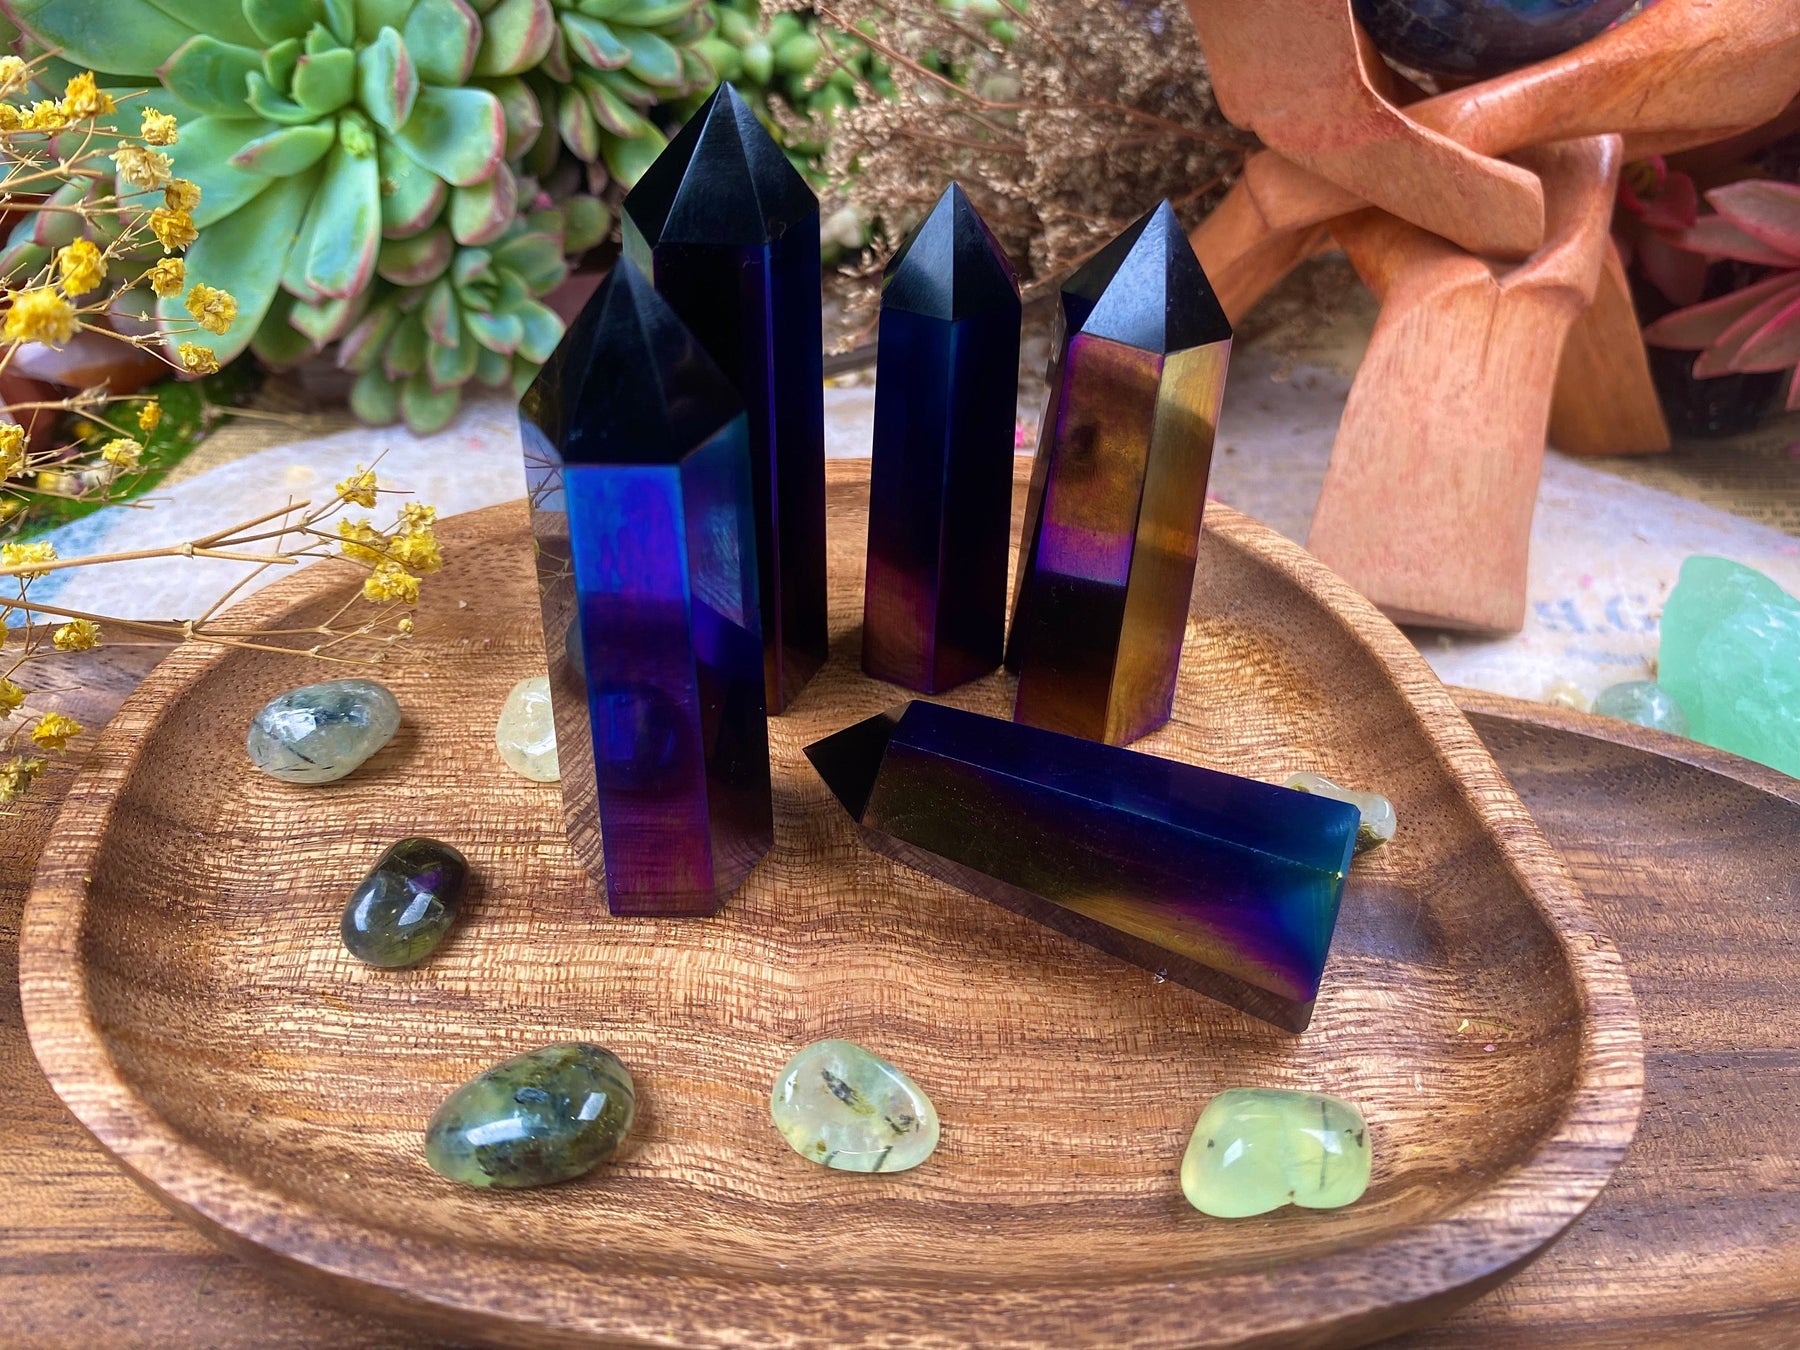 Aura Black Obsidian Crystal Tower - Metaphysical Properties for Energy Clearing and Healing